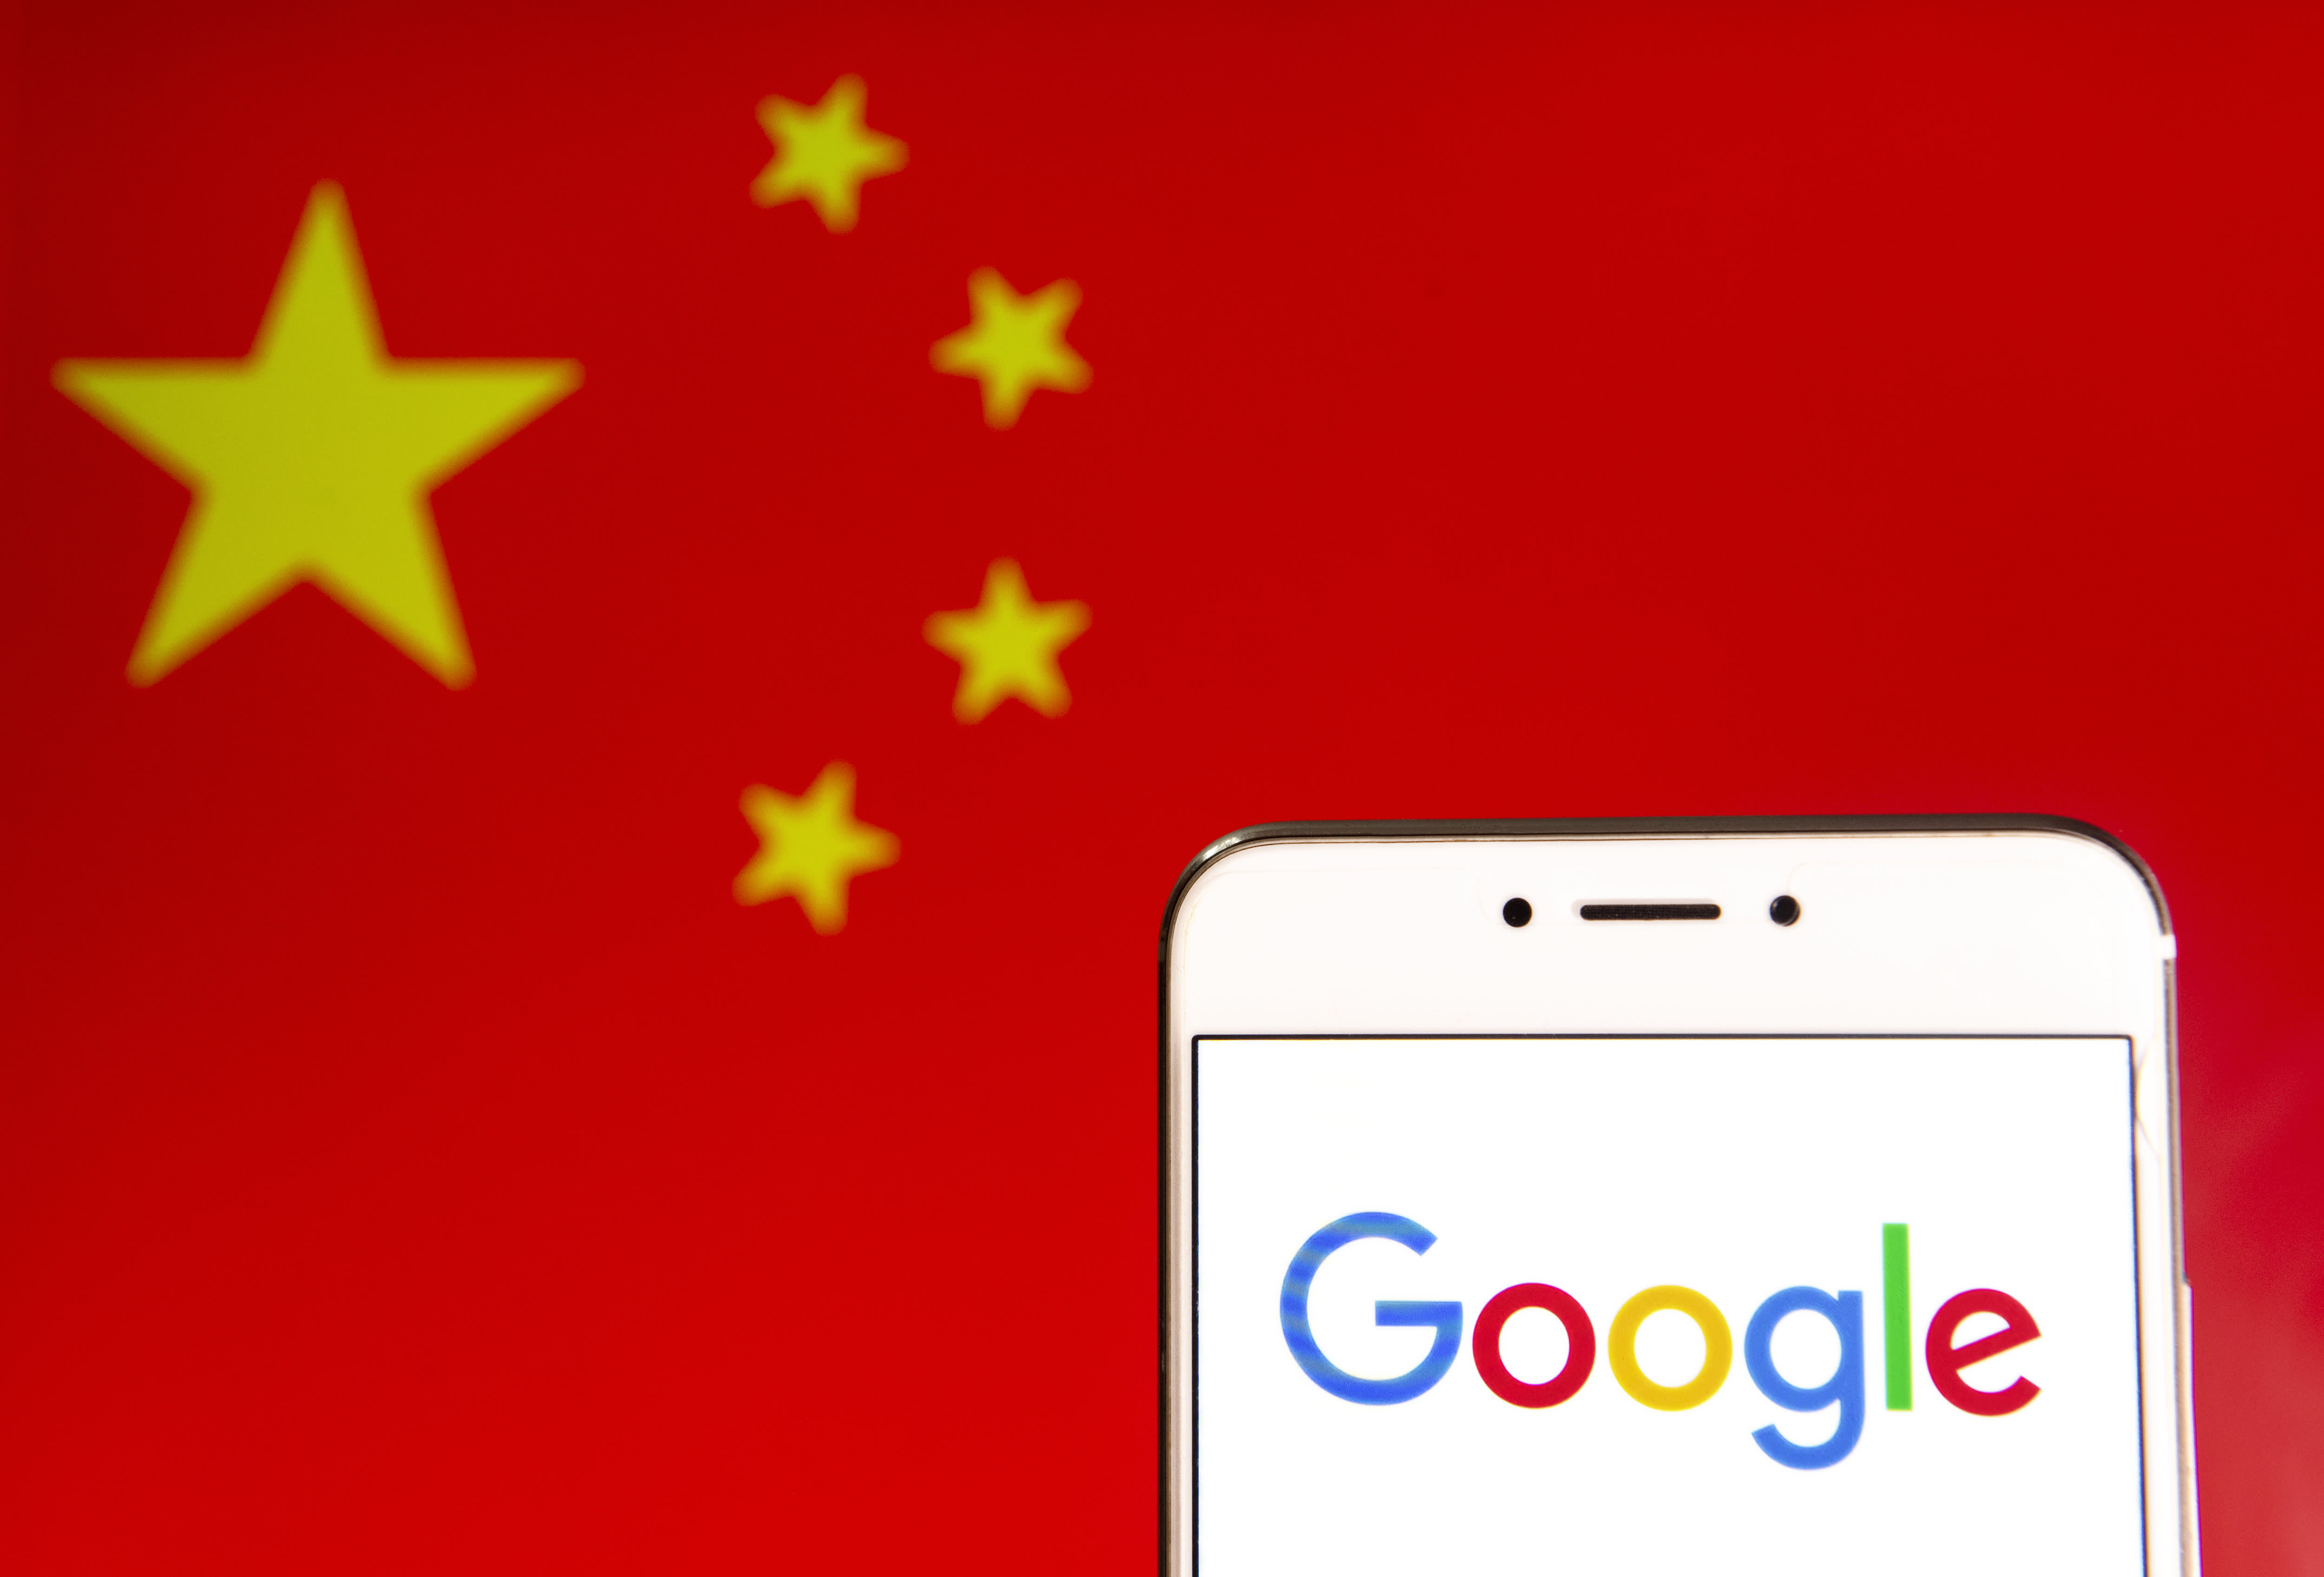 Does China restrict Google?